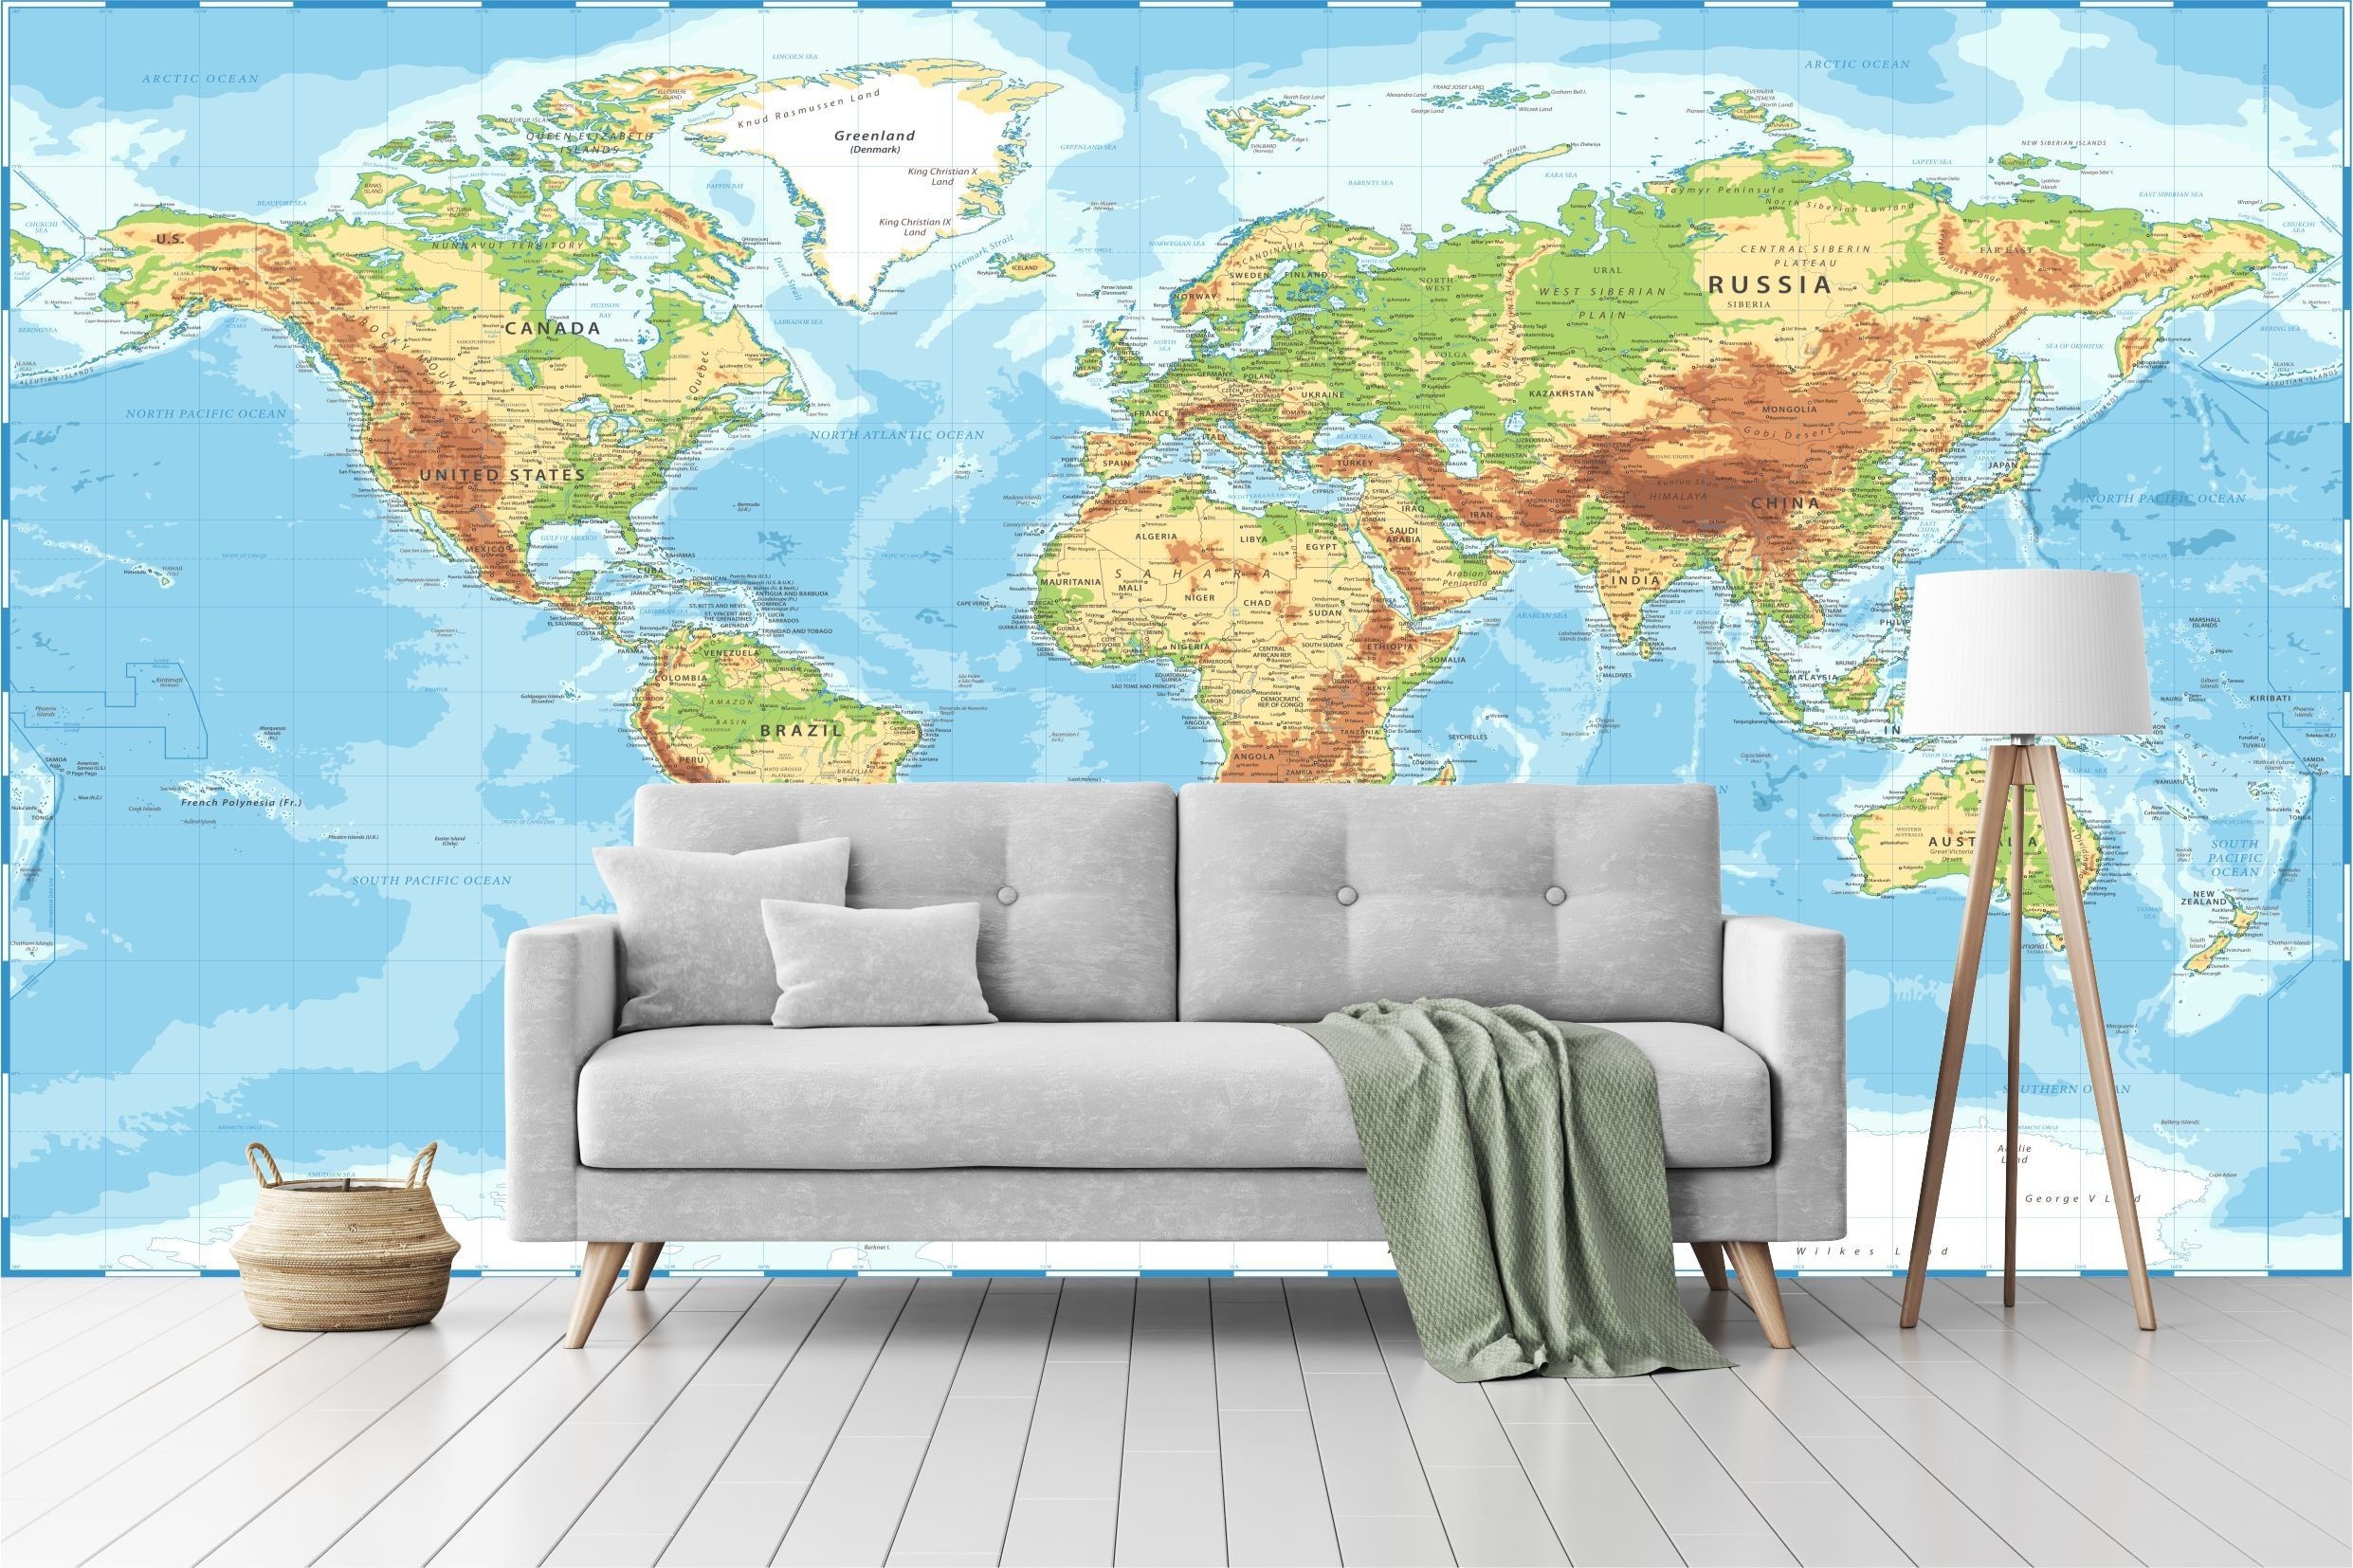 Geography travels, Physical geography map, Peel and stick self adhesive, Living room decor, 2490x1660 HD Desktop